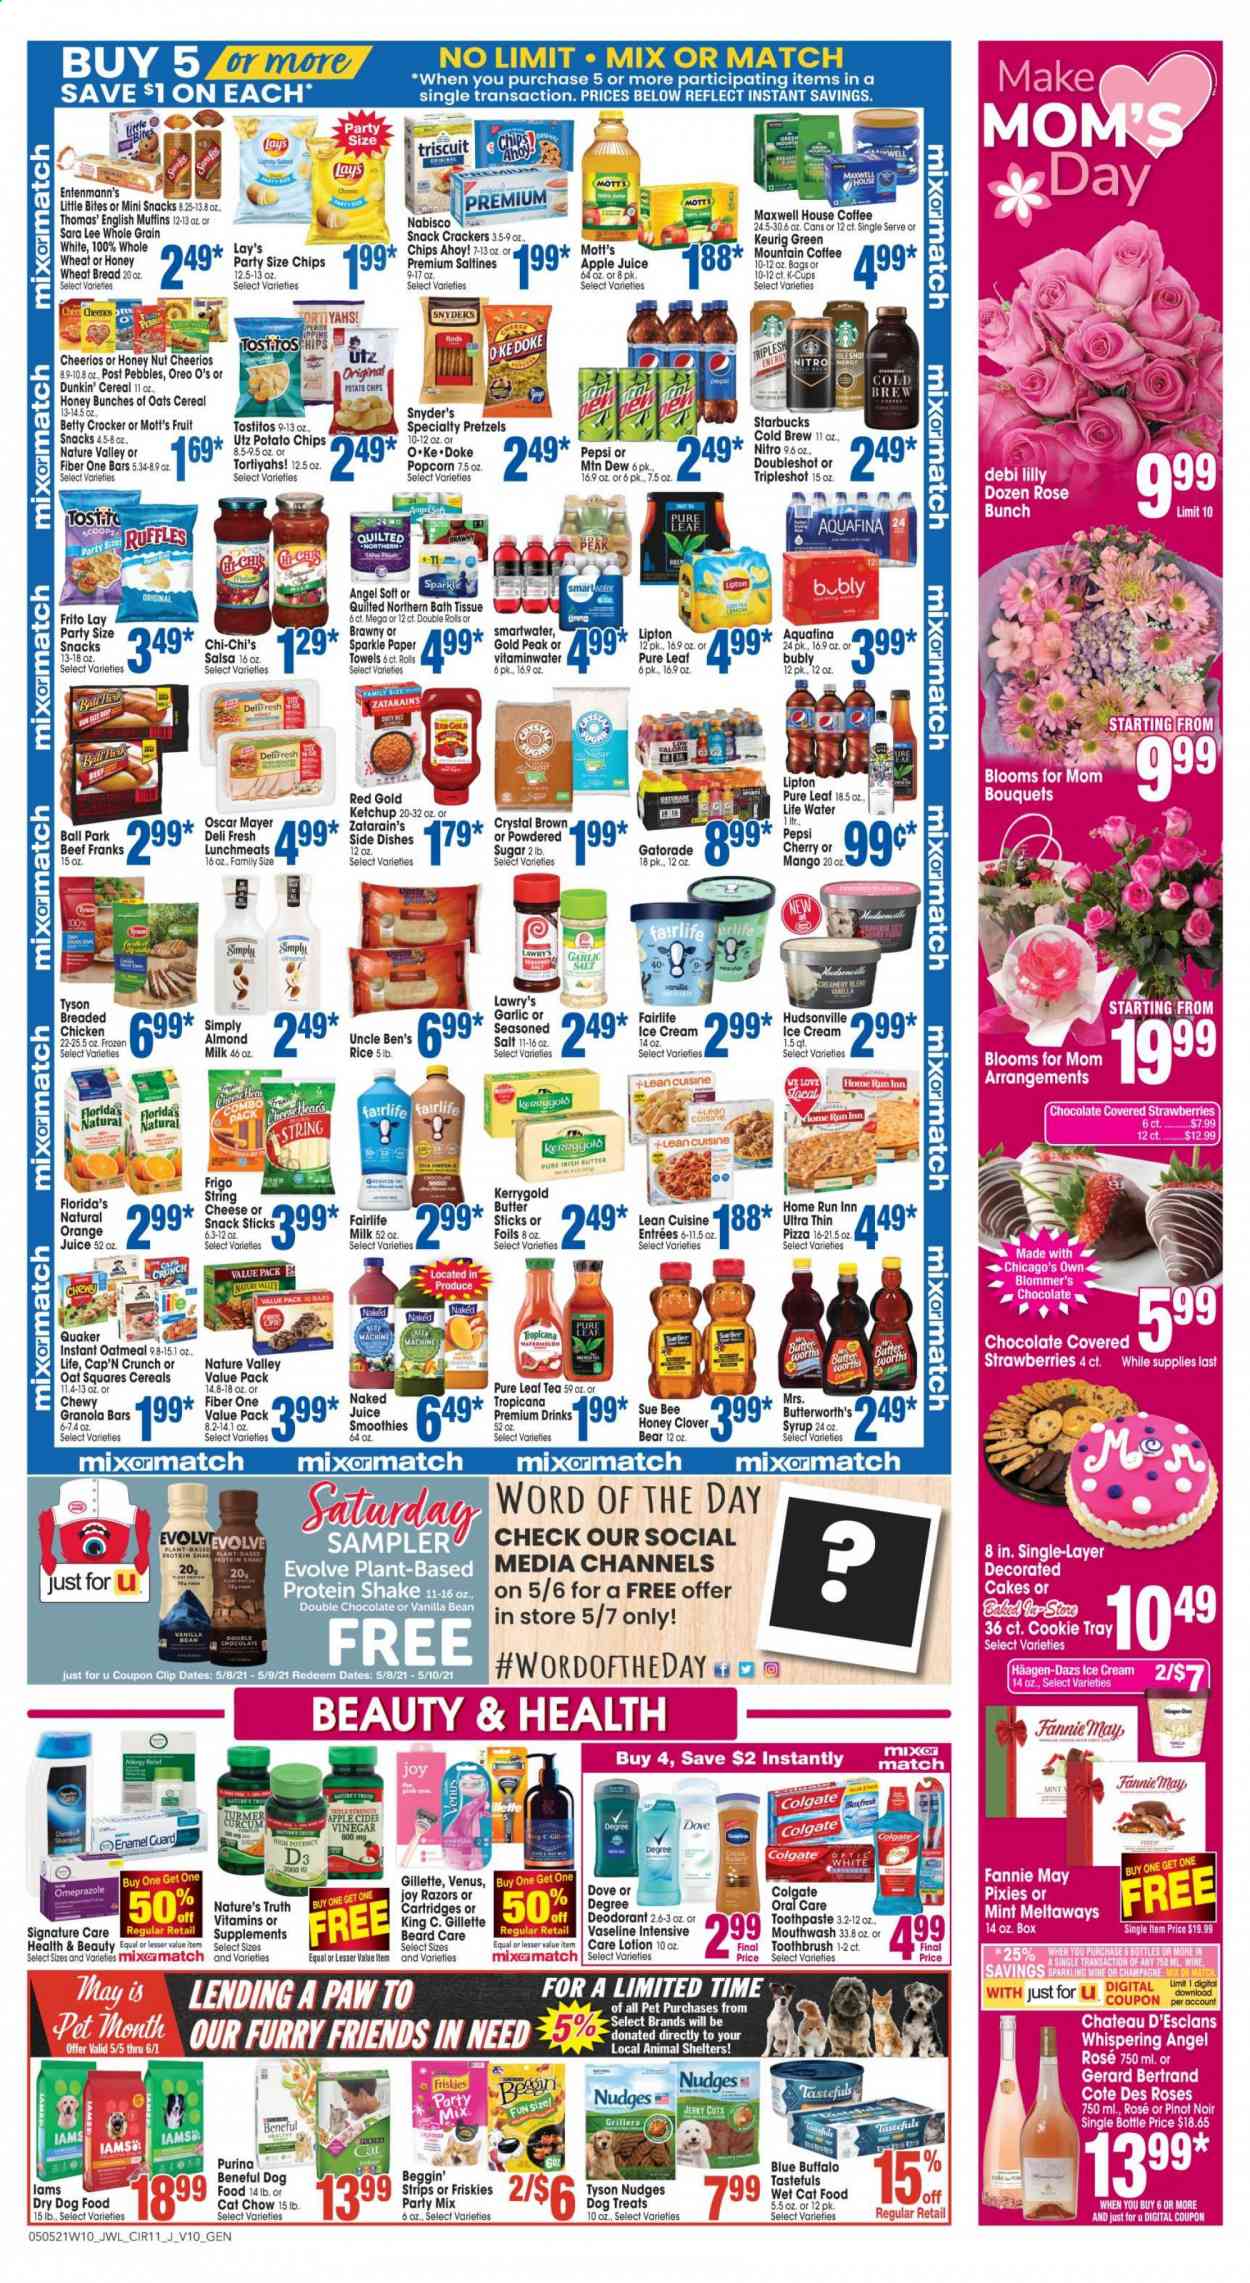 thumbnail - Jewel Osco Flyer - 05/05/2021 - 05/11/2021 - Sales products - english muffins, wheat bread, pretzels, cake, Sara Lee, Entenmann's, garlic, strawberries, watermelon, pears, Mott's, pizza, fried chicken, Quaker, Lean Cuisine, jerky, Oscar Mayer, lunch meat, Oreo, almond milk, protein drink, shake, irish butter, ice cream, Häagen-Dazs, strips, crackers, fruit snack, Chips Ahoy!, Little Bites, Florida's Natural, potato chips, Lay’s, popcorn, saltines, Ruffles, Tostitos, sugar, oatmeal, Uncle Ben's, cereals, Cheerios, granola bar, Cap'n Crunch, Nature Valley, Fiber One, rice, ketchup, salsa, apple cider vinegar, syrup, apple juice, Mountain Dew, Pepsi, orange juice, juice, Lipton, Gatorade, smoothie, Aquafina, Smartwater, Maxwell House, tea, Pure Leaf, coffee, Starbucks, coffee capsules, K-Cups, Keurig, red wine, sparkling wine, champagne, wine, Pinot Noir, rosé wine, Dove, bath tissue, Quilted Northern, Joy, Vaseline, Colgate, toothbrush, toothpaste, mouthwash, body lotion, anti-perspirant, deodorant, Gillette, Venus, tray, paper, animal food, Blue Buffalo, cat food, dog food, Purina, dry dog food, Beggin', Friskies, Iams, wet cat food, bunches, bouquet, rose, Nature's Truth, vitamin D3, allergy relief. Page 11.